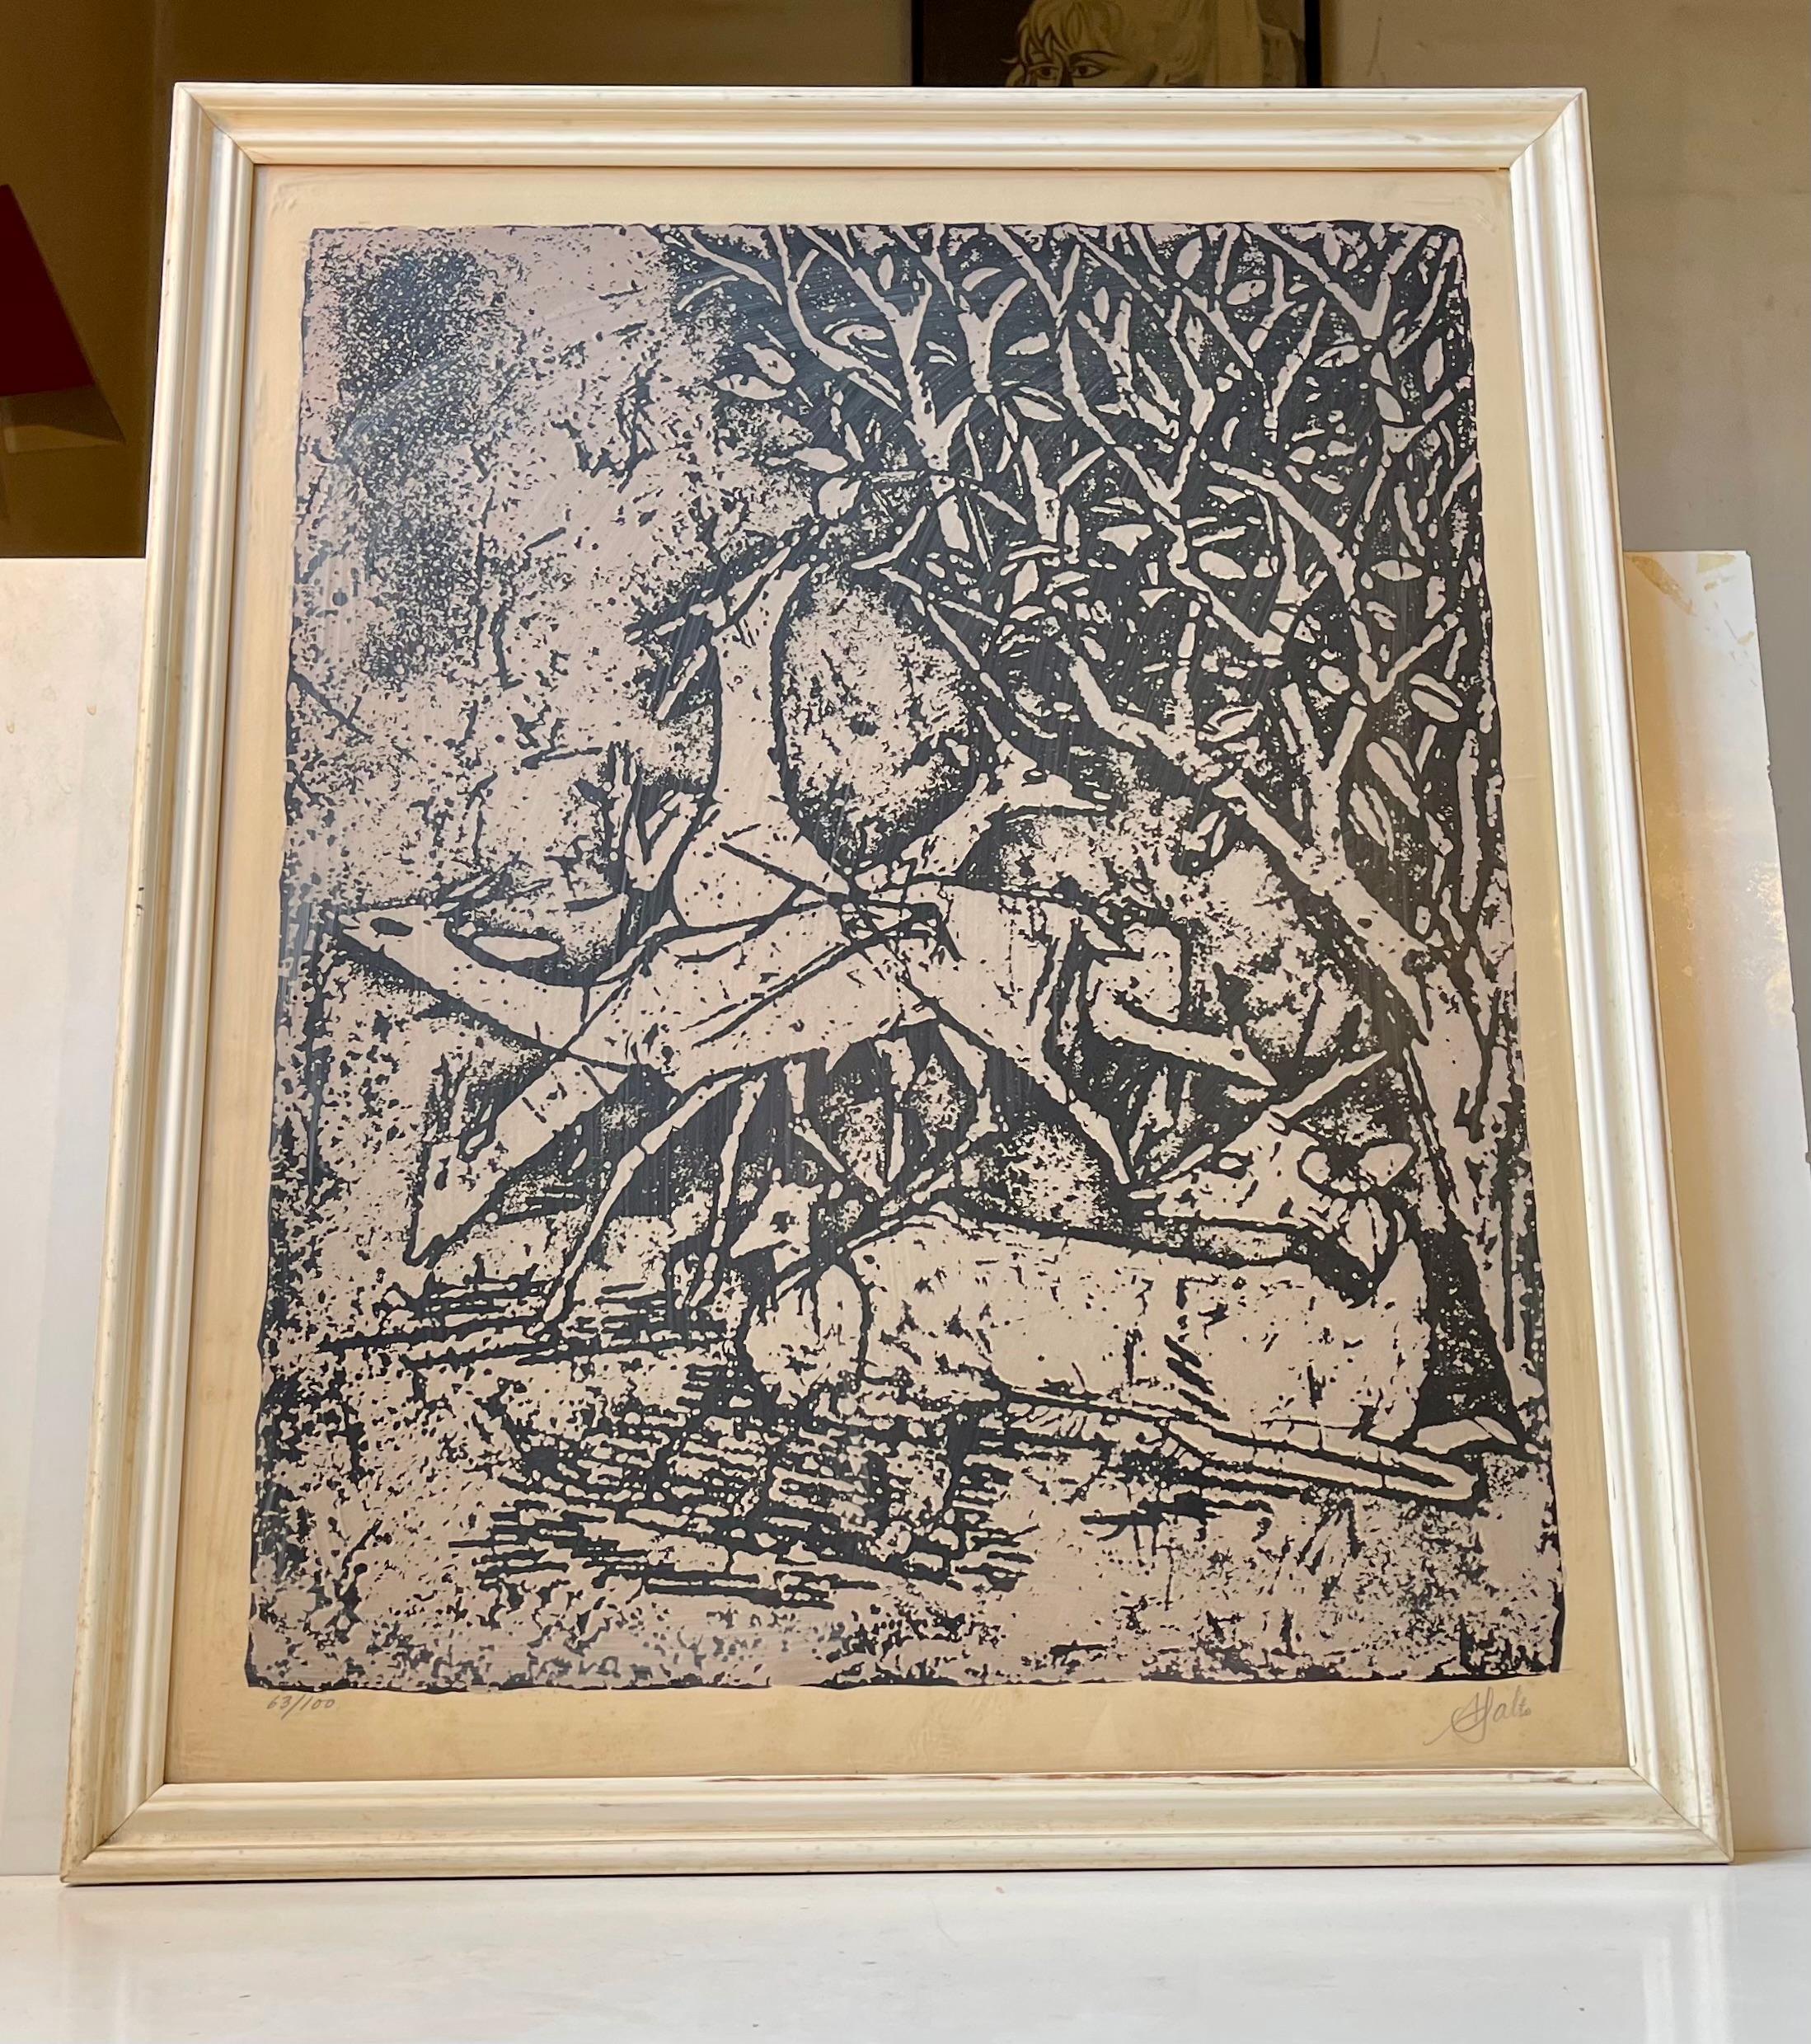 Large Axel Salto woodcut/lithograph. Typical Salto depiction of wild deer in a grey/black composition. This is number 63 of af limited run of 100 pieces made during the late 1930s or early 40s. Pencil signed by the artist A. Salto to its bottom